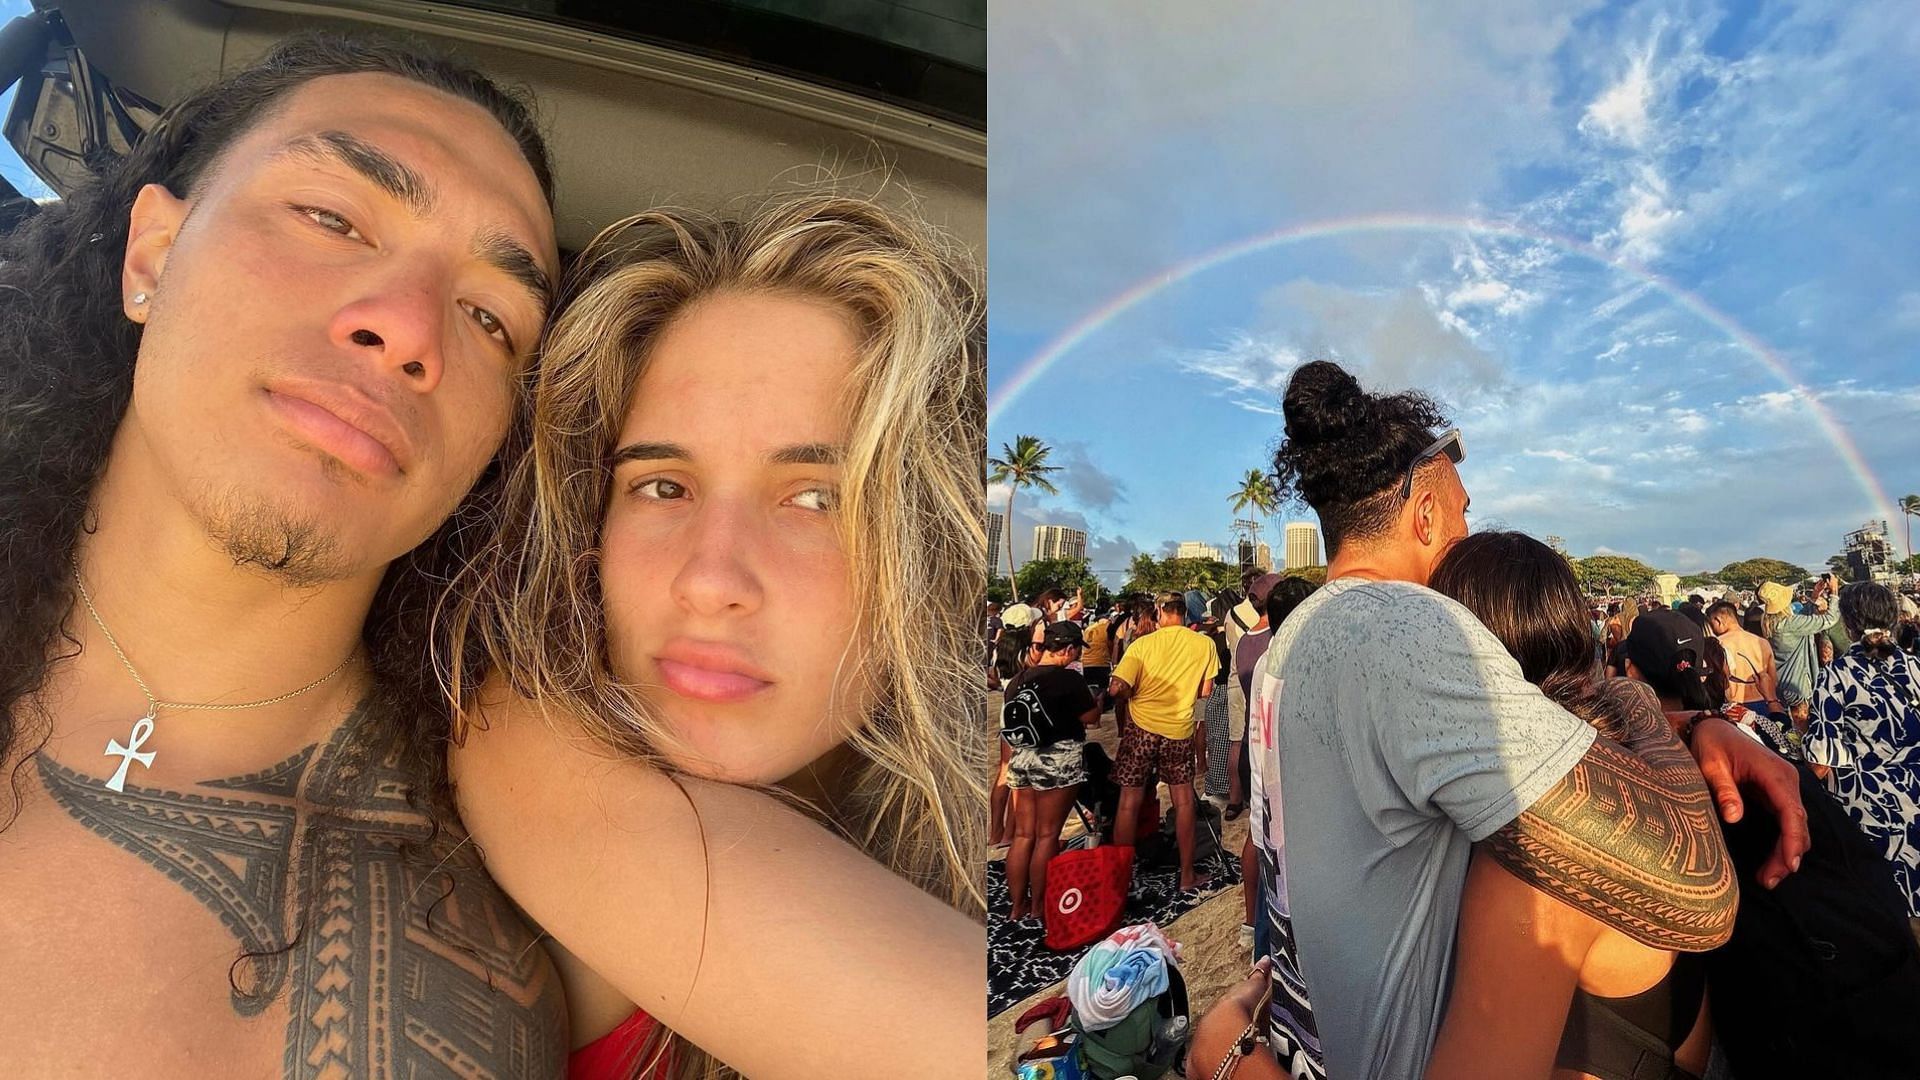 5 best pictures of Sonia Citron and her boyfriend. 